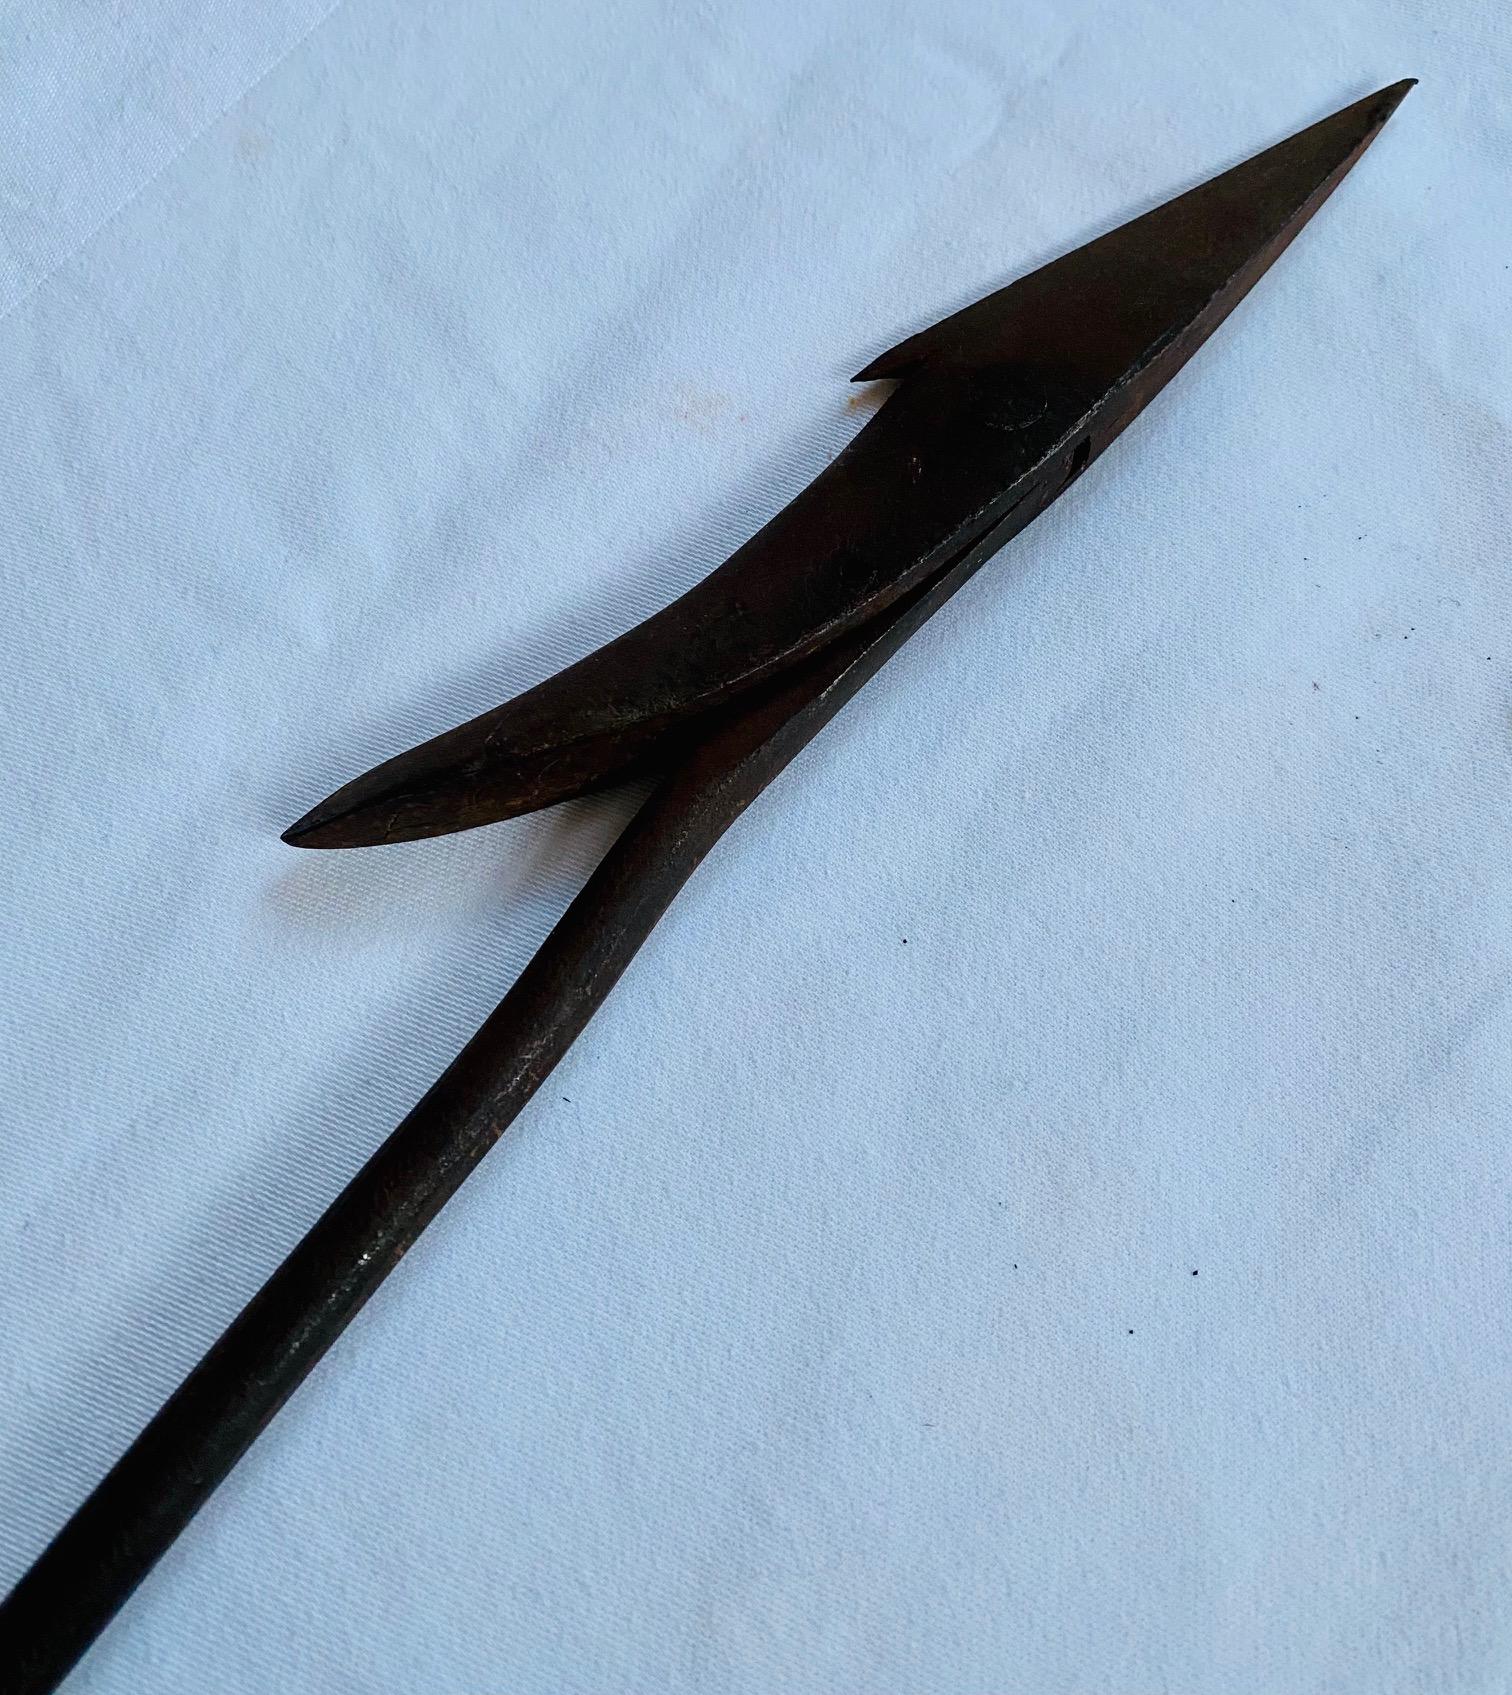 Antique Azorean or Madeiran Improved Toggle Iron Harpoon, early 20th century, having a low profile racy 7-1/4 inch long toggle head with sharply acute barbed cutting edge and up-swept rear barb, pivoting on flatted boss, on 3/8 inch diameter shank